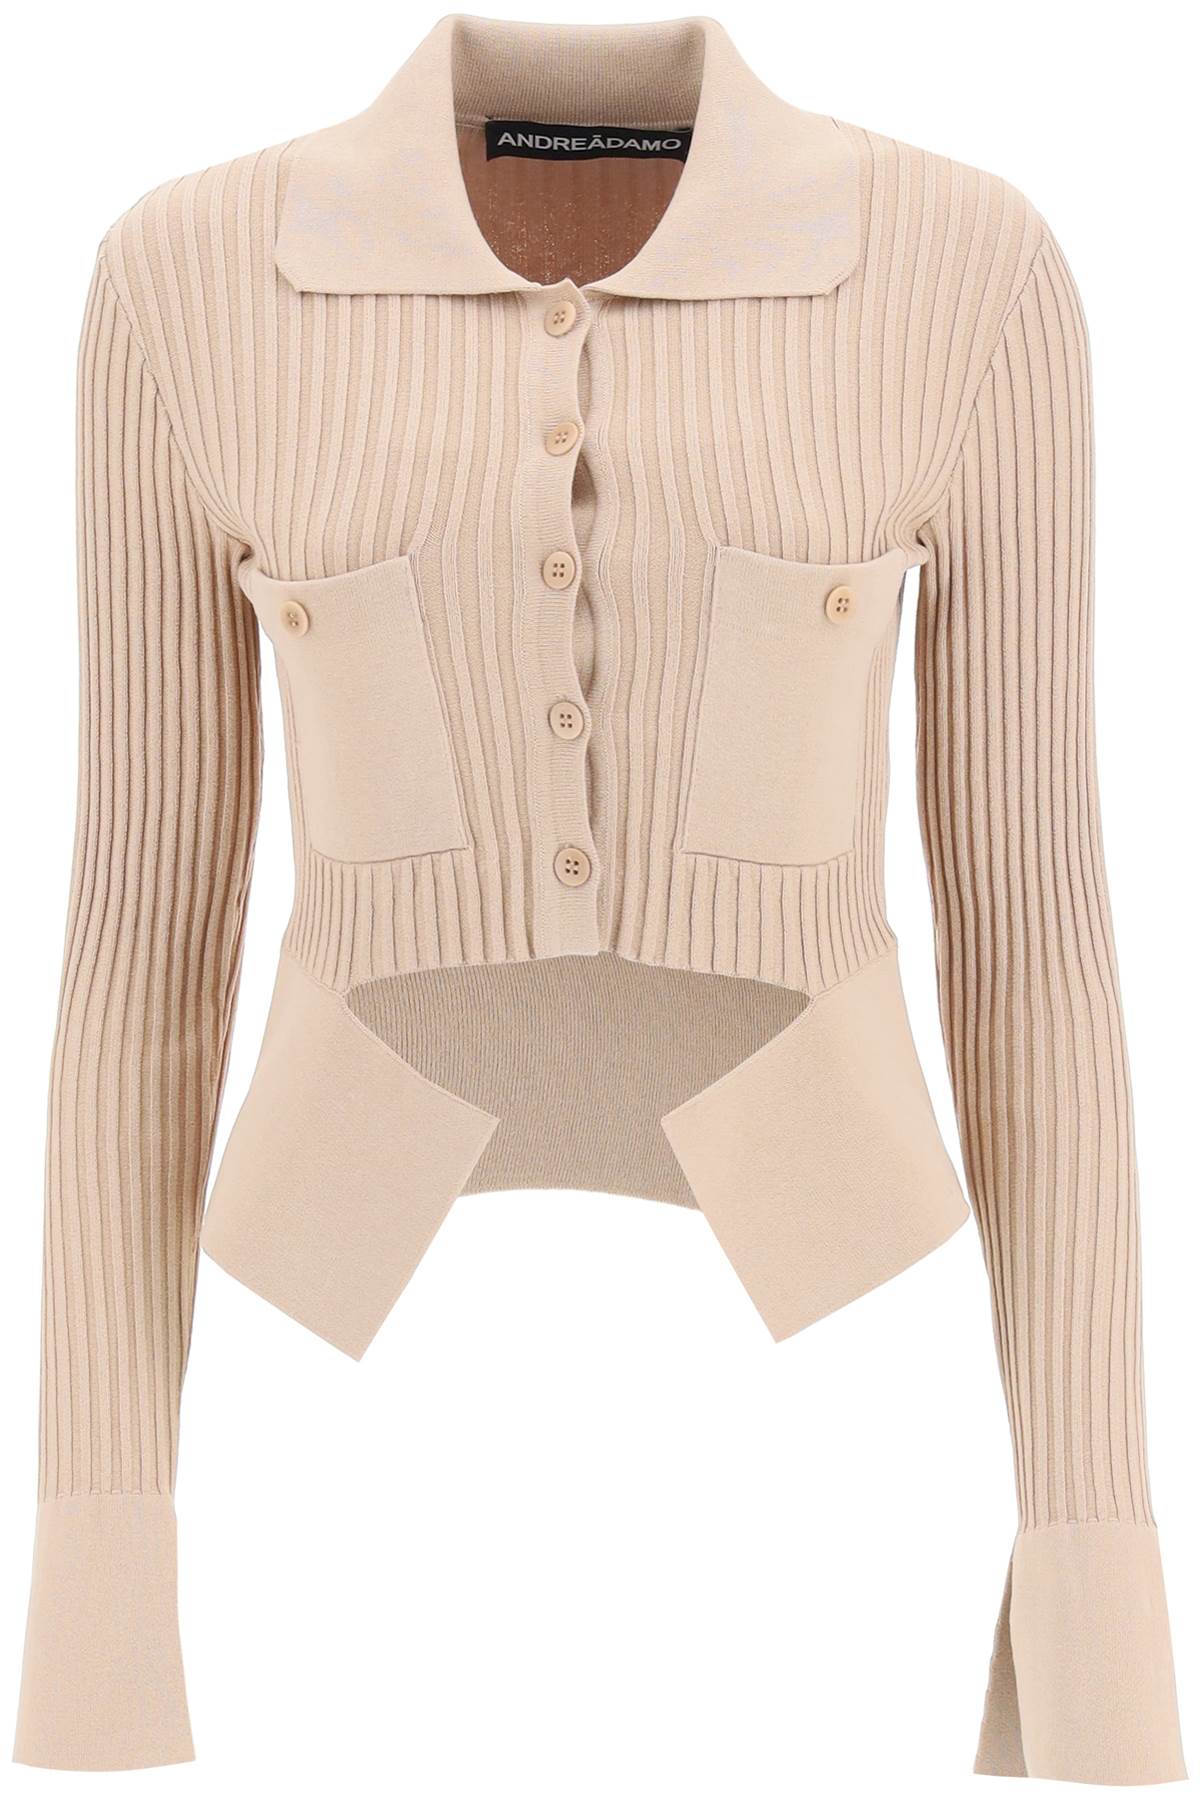 ANDREADAMO Ribbed Cardigan With Cut-out